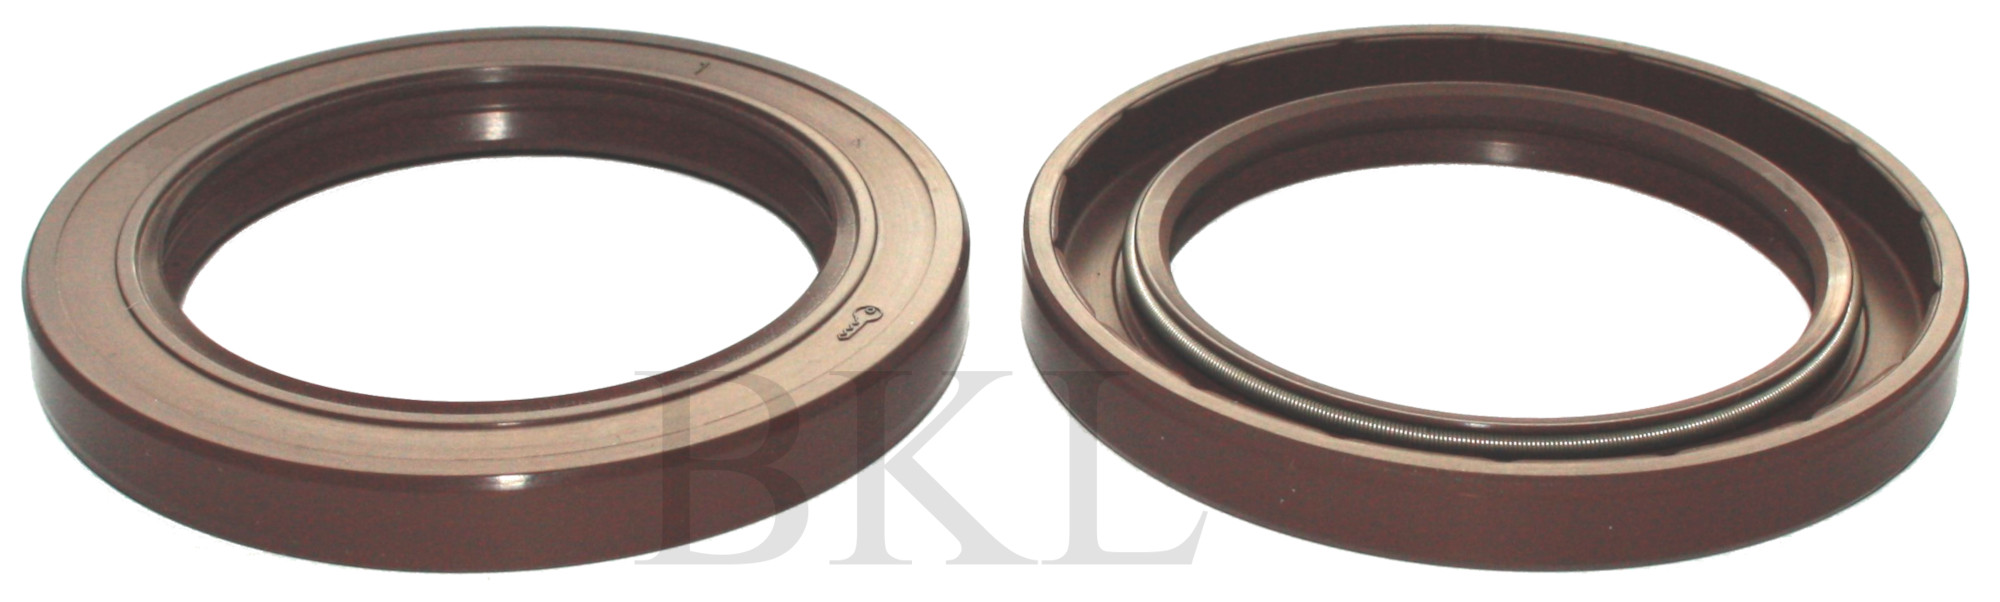 90x120x12mm R23/TC Double Lip Viton Rotary Shaft Oil Seal with Garter Spring image 2